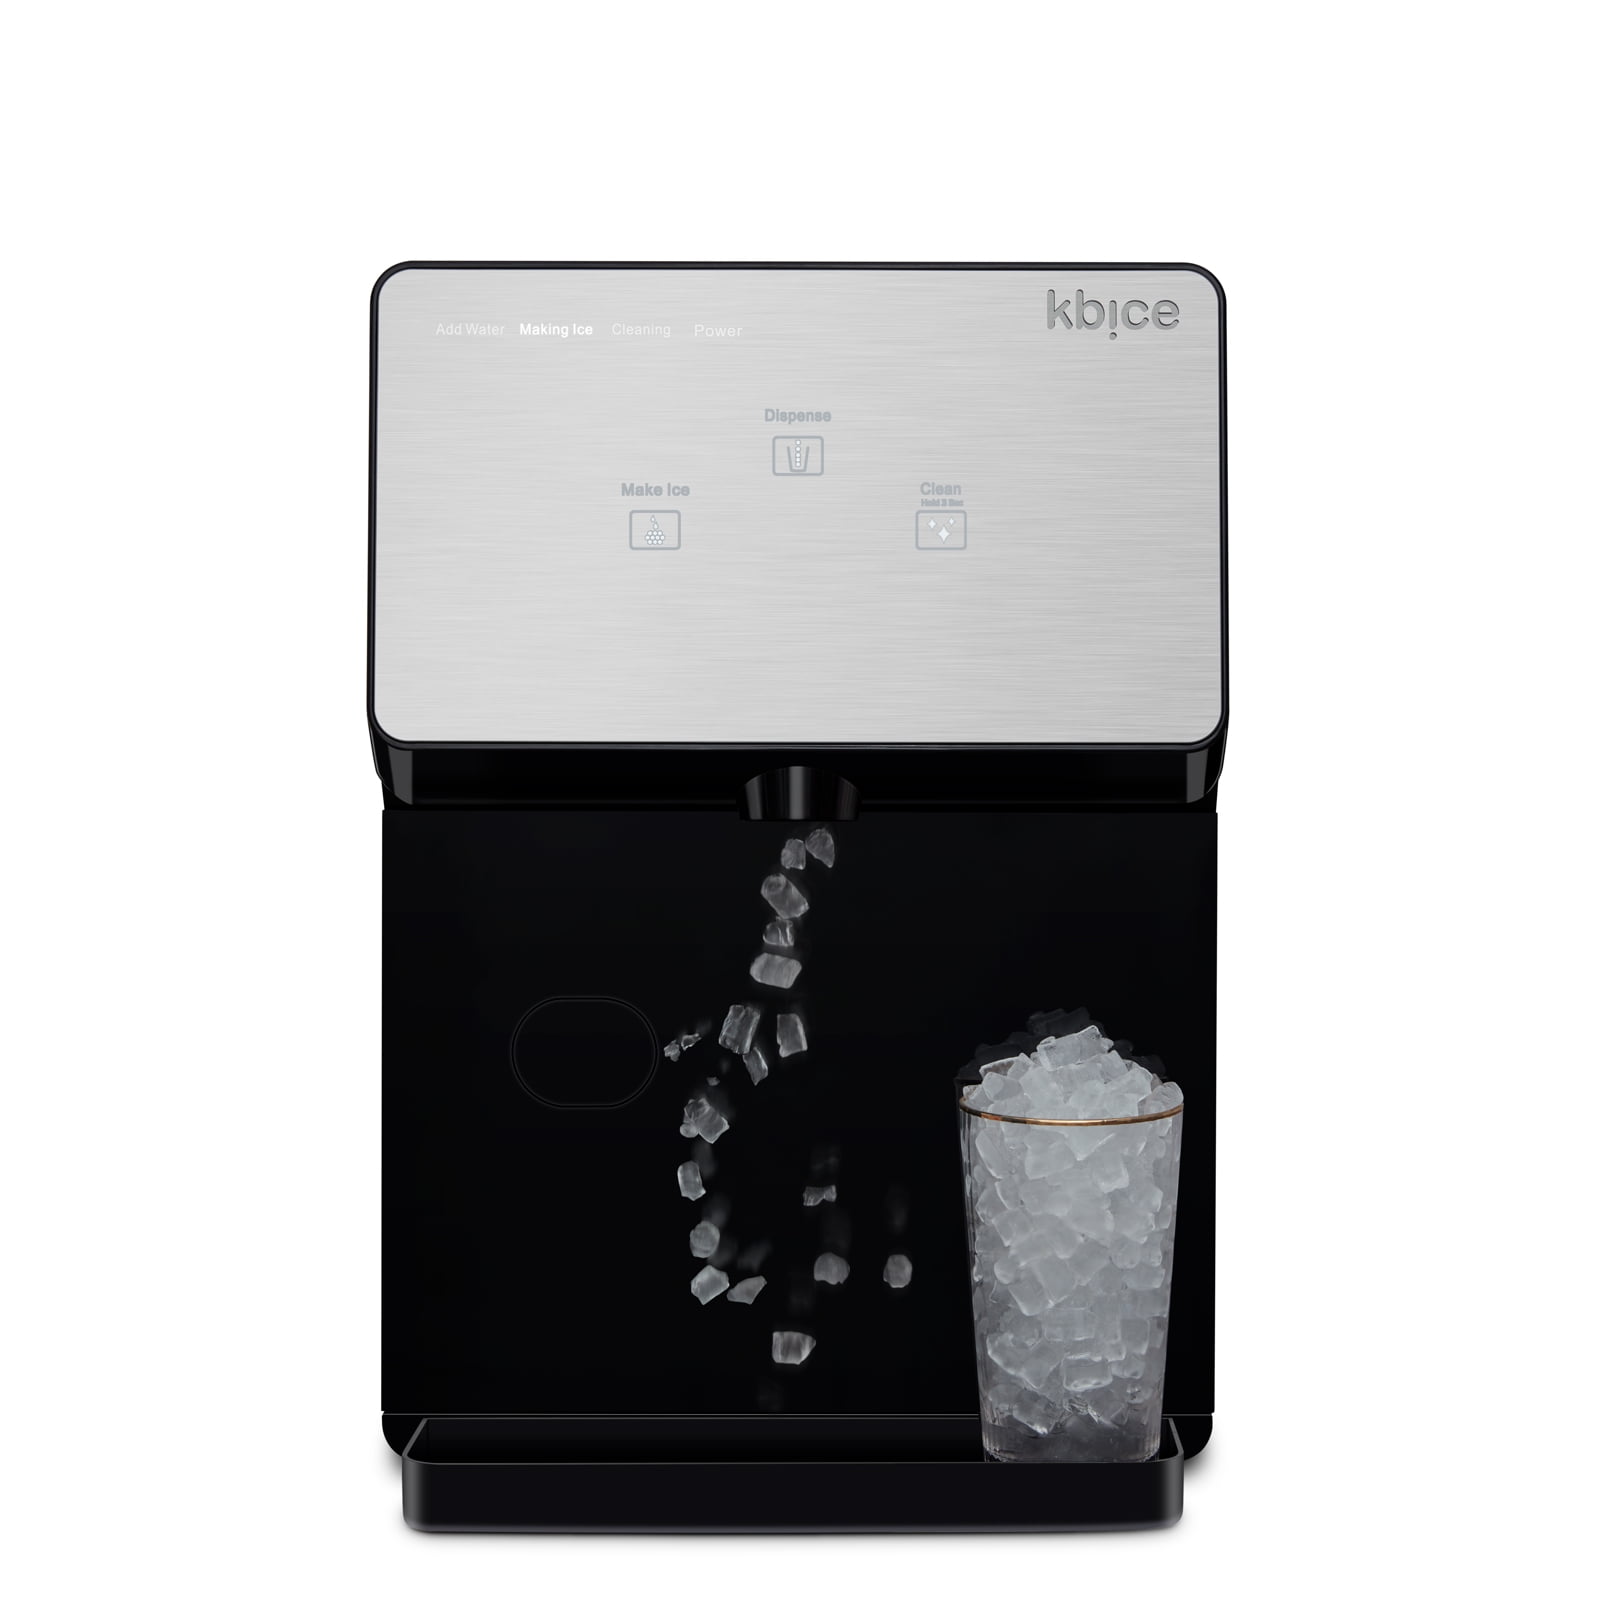 Philergo Nugget Ice Maker Countertop, 33lbs/24H with Self-Cleaning